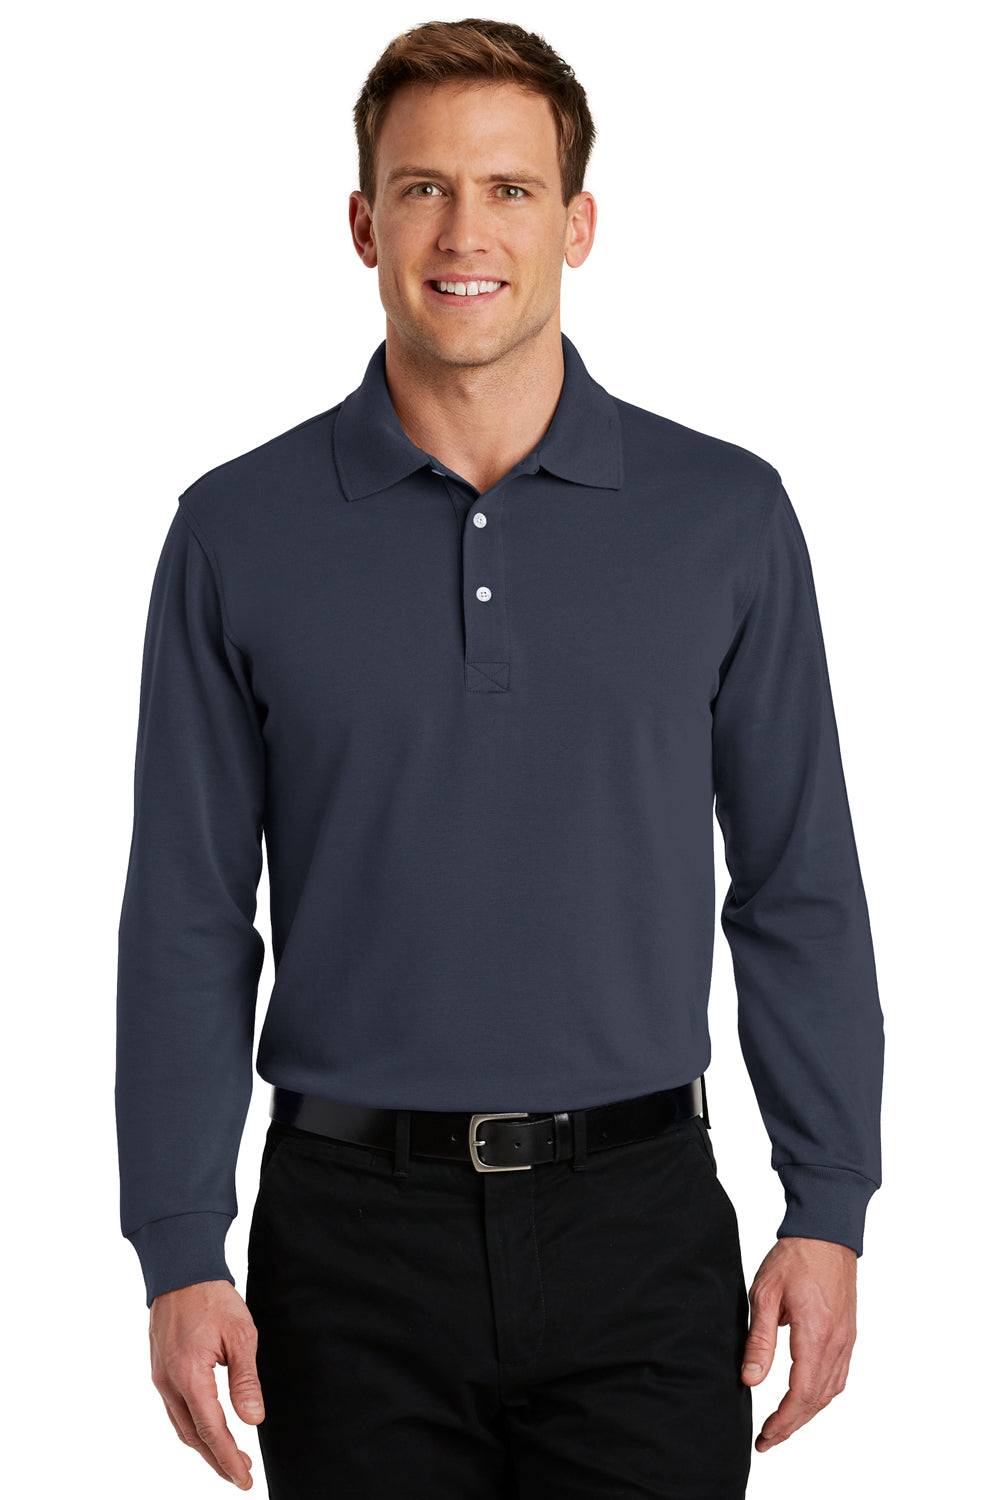 Port Authority K455LS Mens Rapid Dry Moisture Wicking Long Sleeve Polo Shirt Navy Blue Front